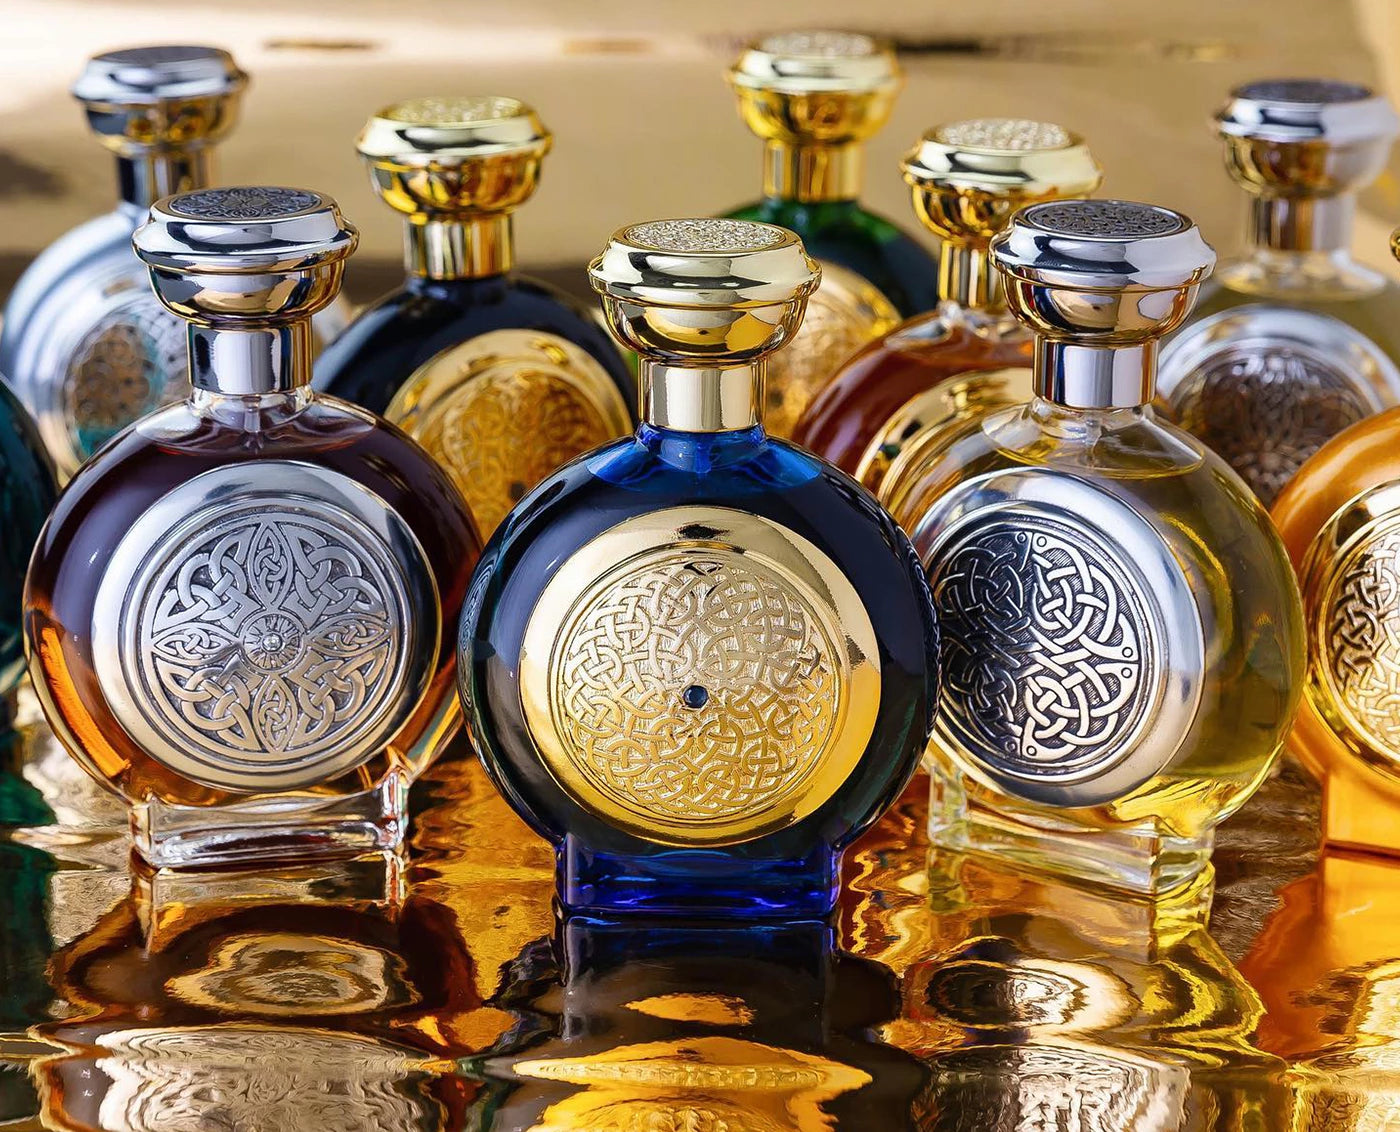 Boadicea the Victorious Perfumes and Colognes Collection